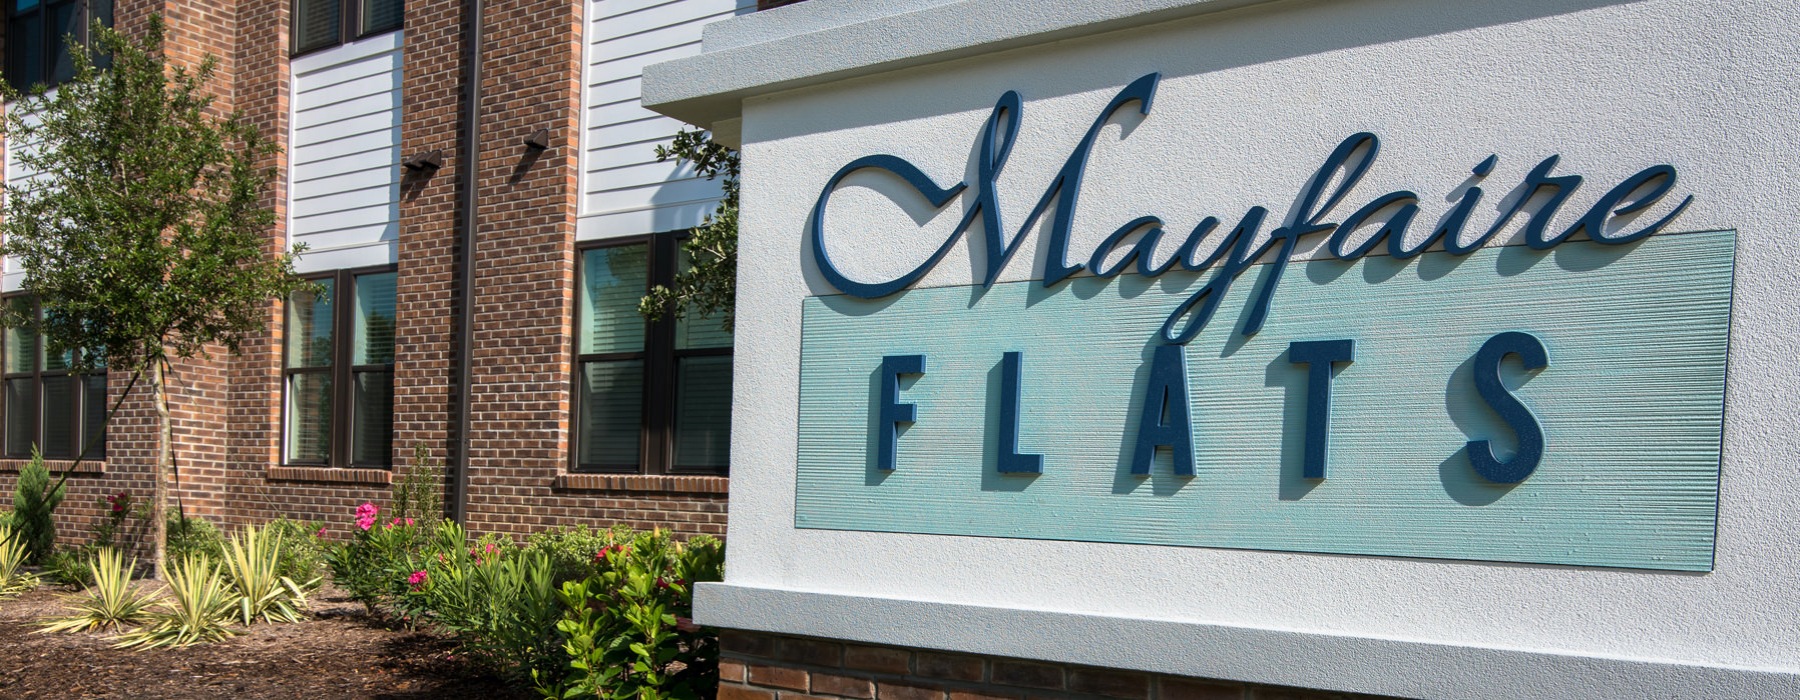 Mayfaire Flats signage out front of the property